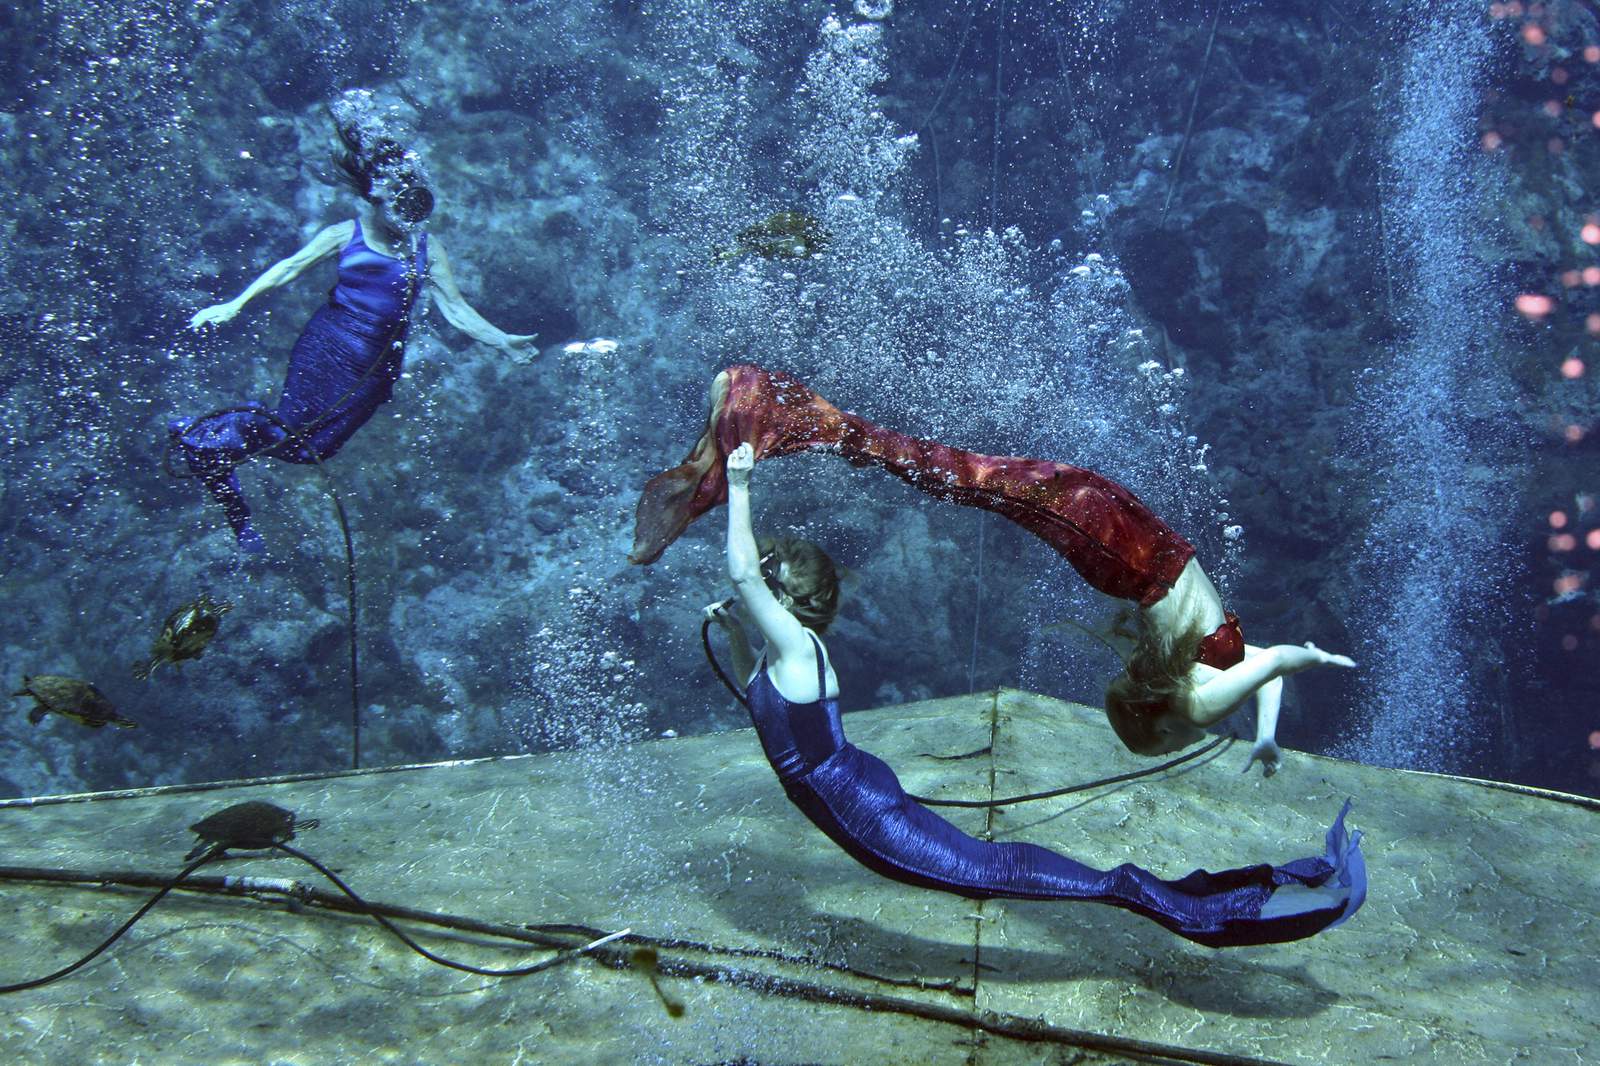 Florida city known for mermaids now sleeps with the fishes